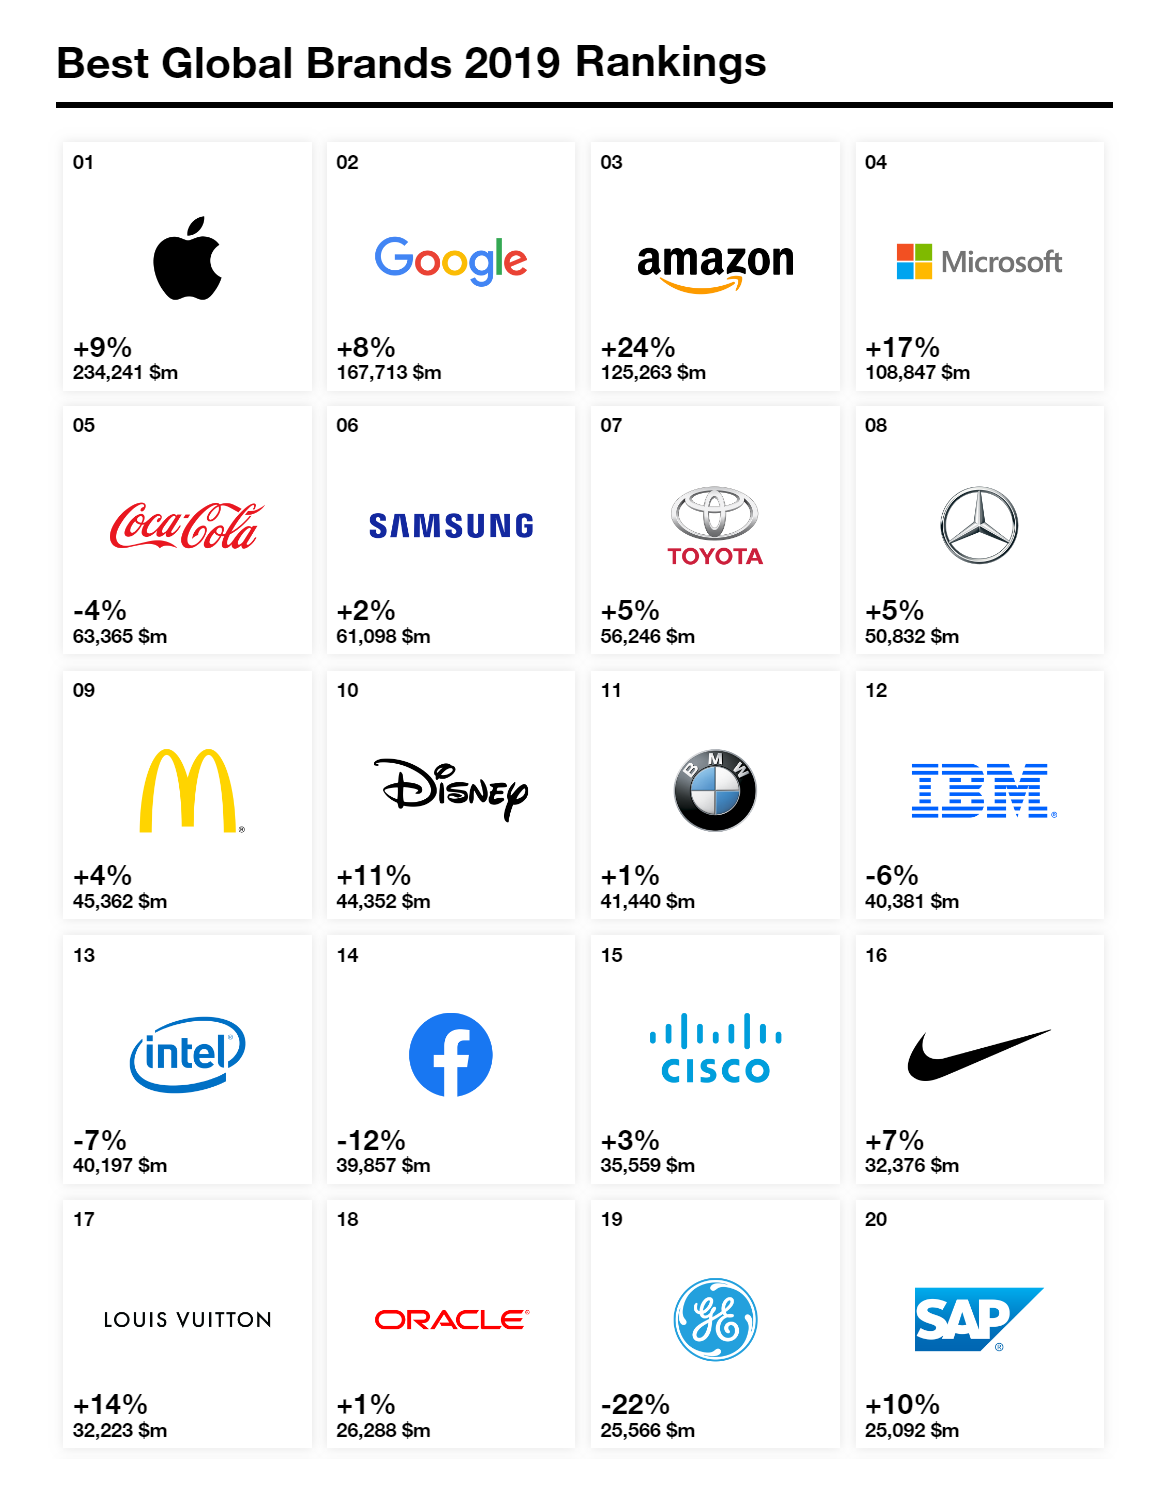 These are the top 20 Best Global Brands